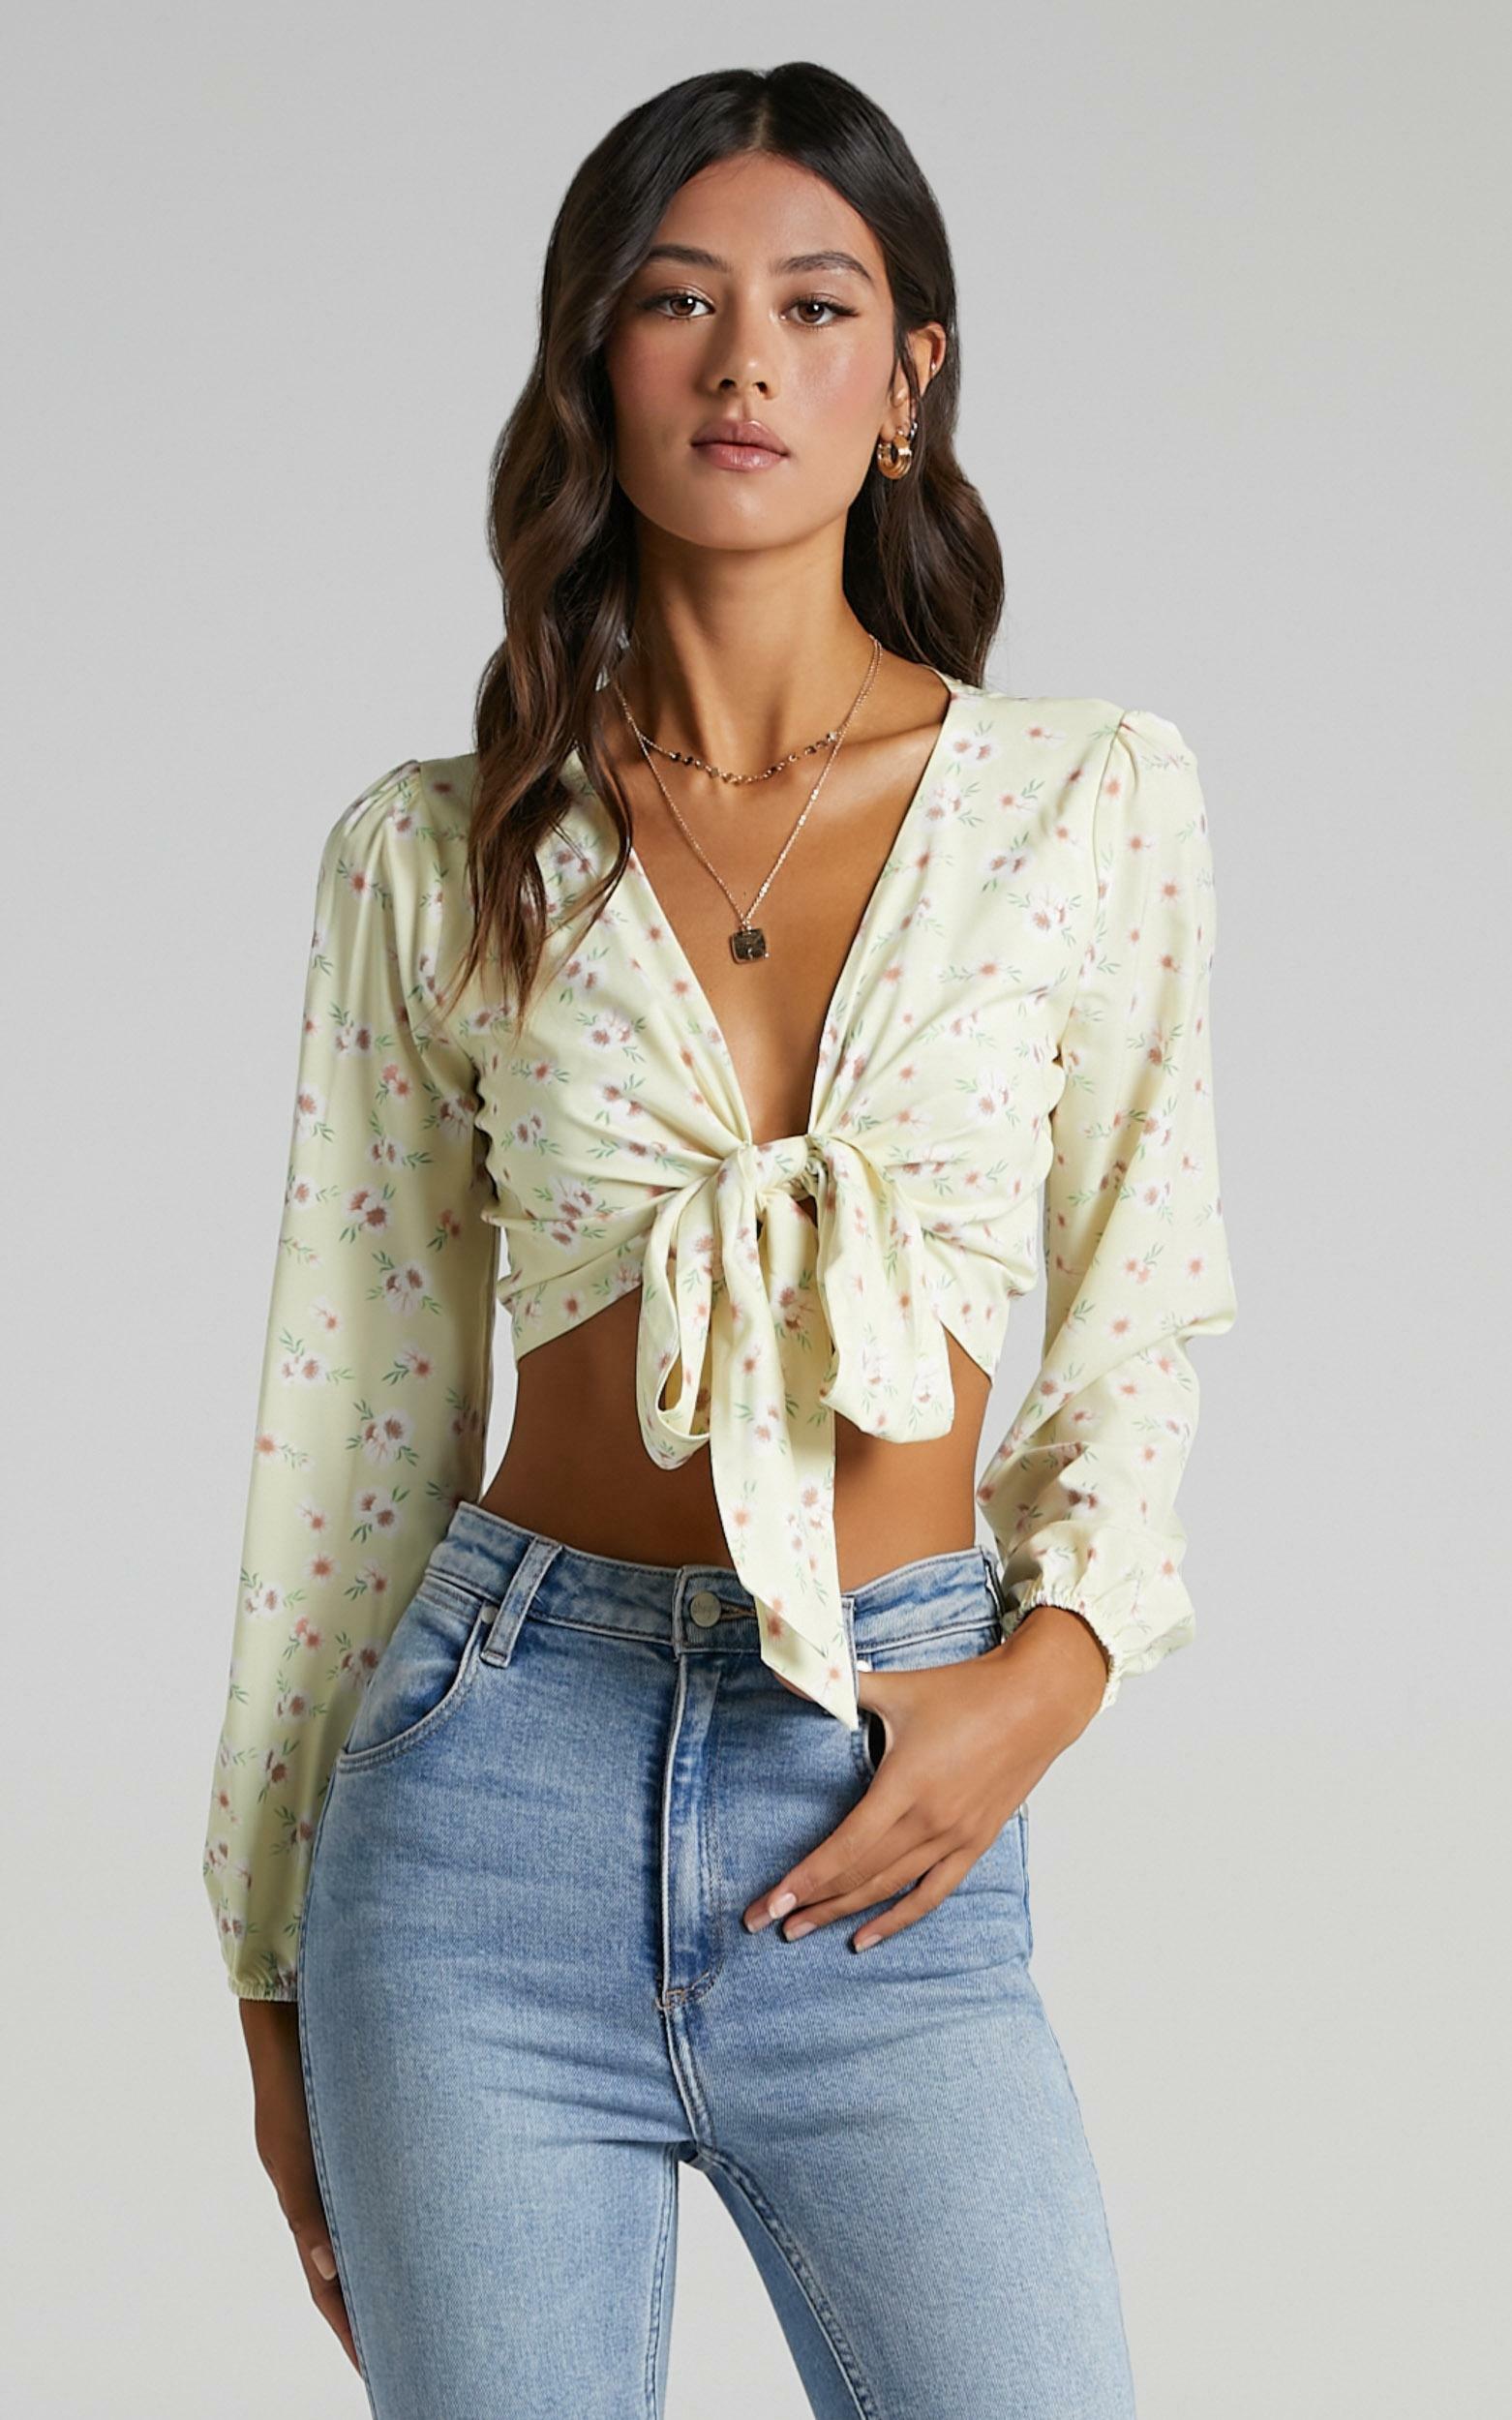 Spring Break Top in Yellow Floral - 06, YEL1, hi-res image number null